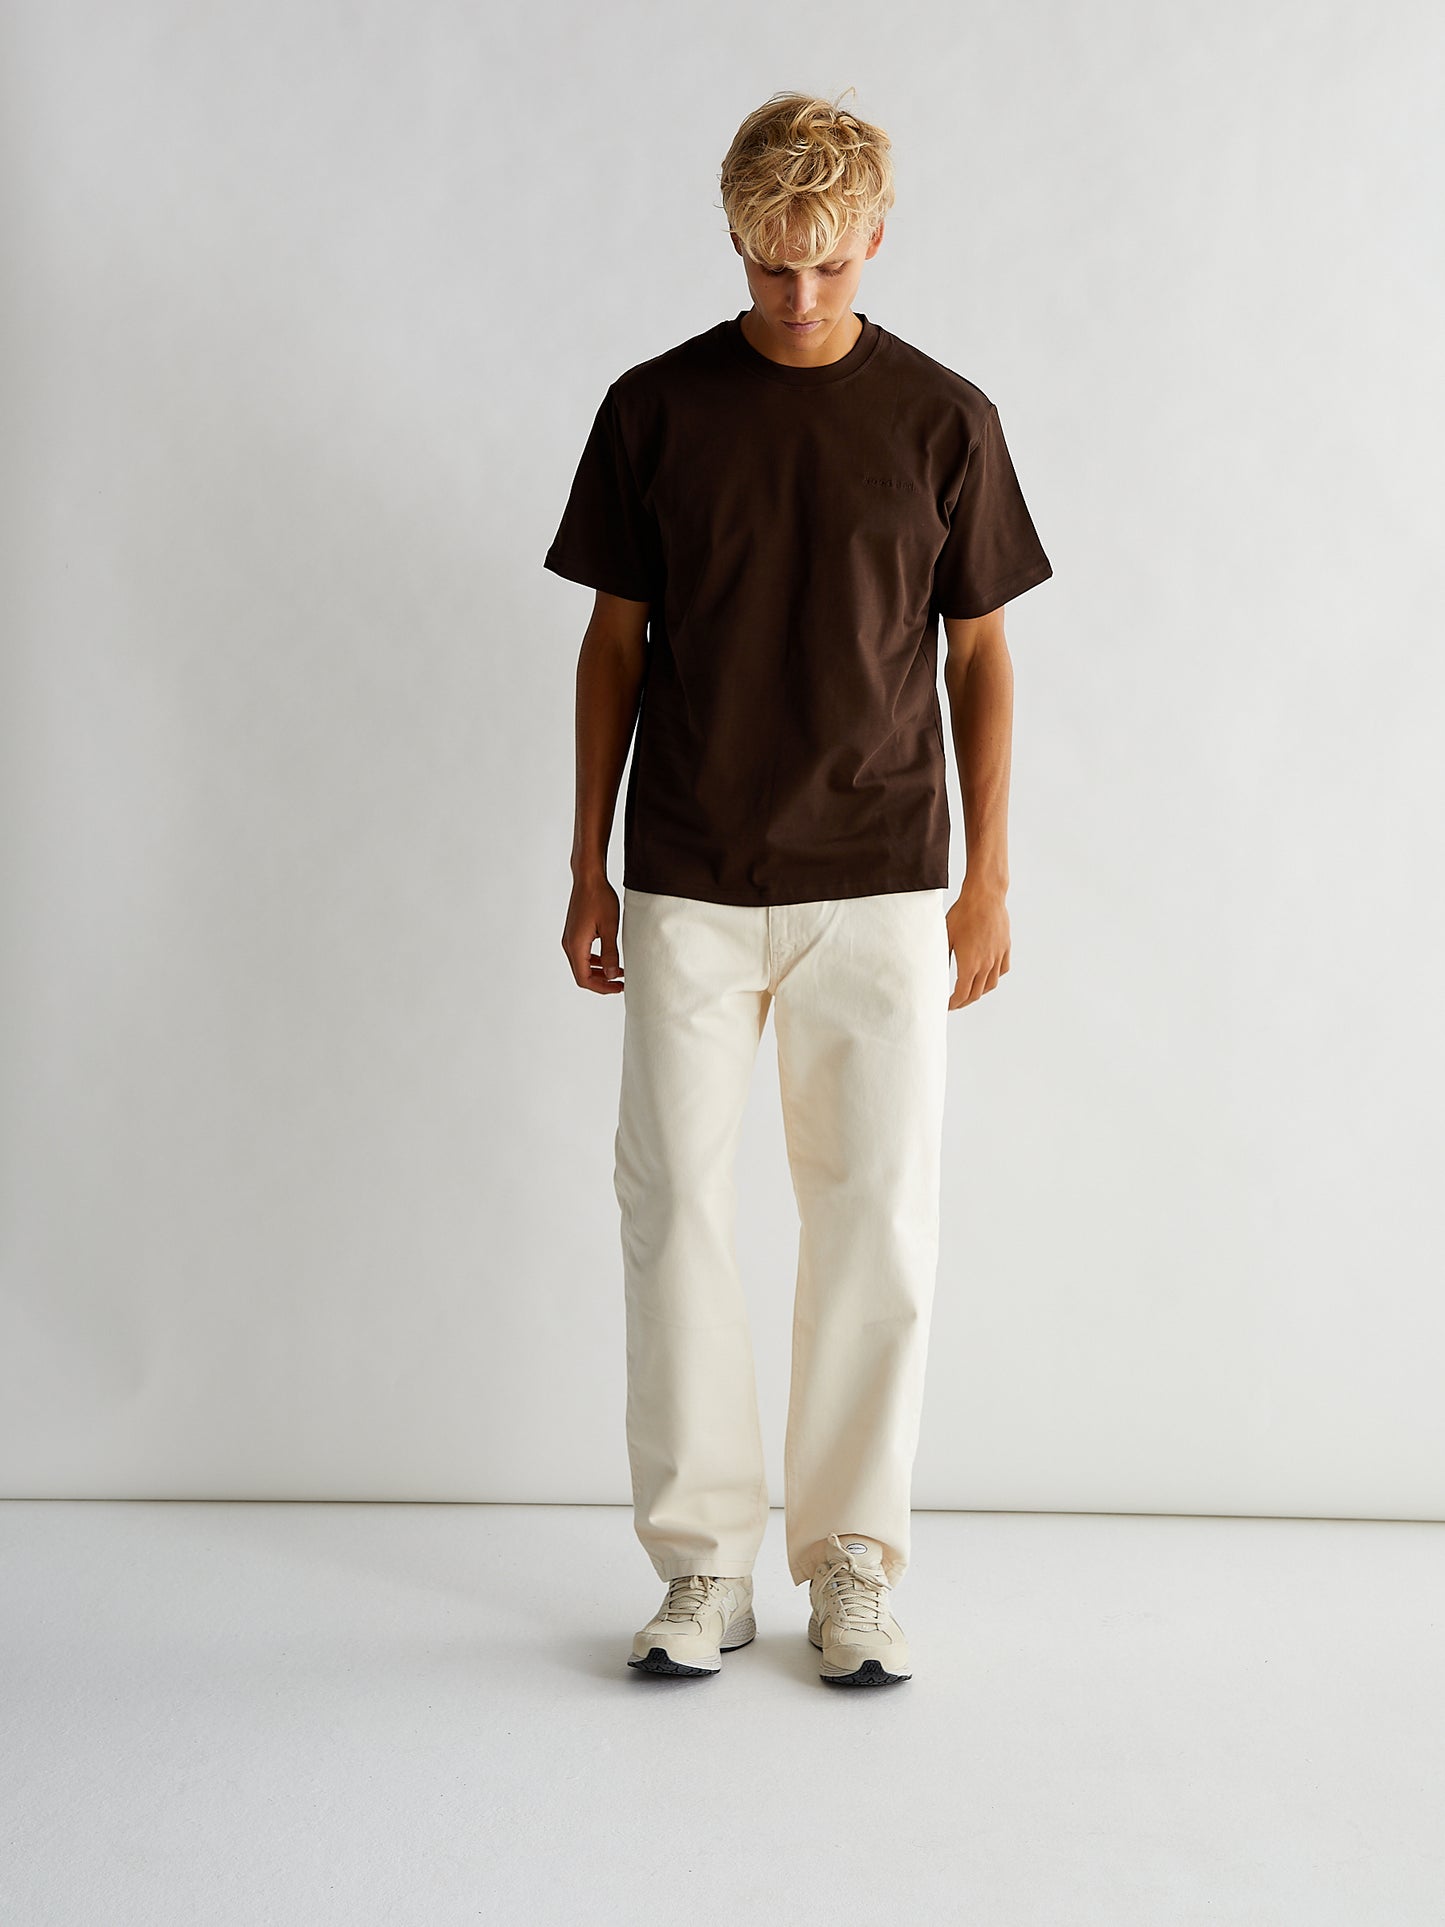 Woodbird  Leroy Twill Pants Jeans Off White